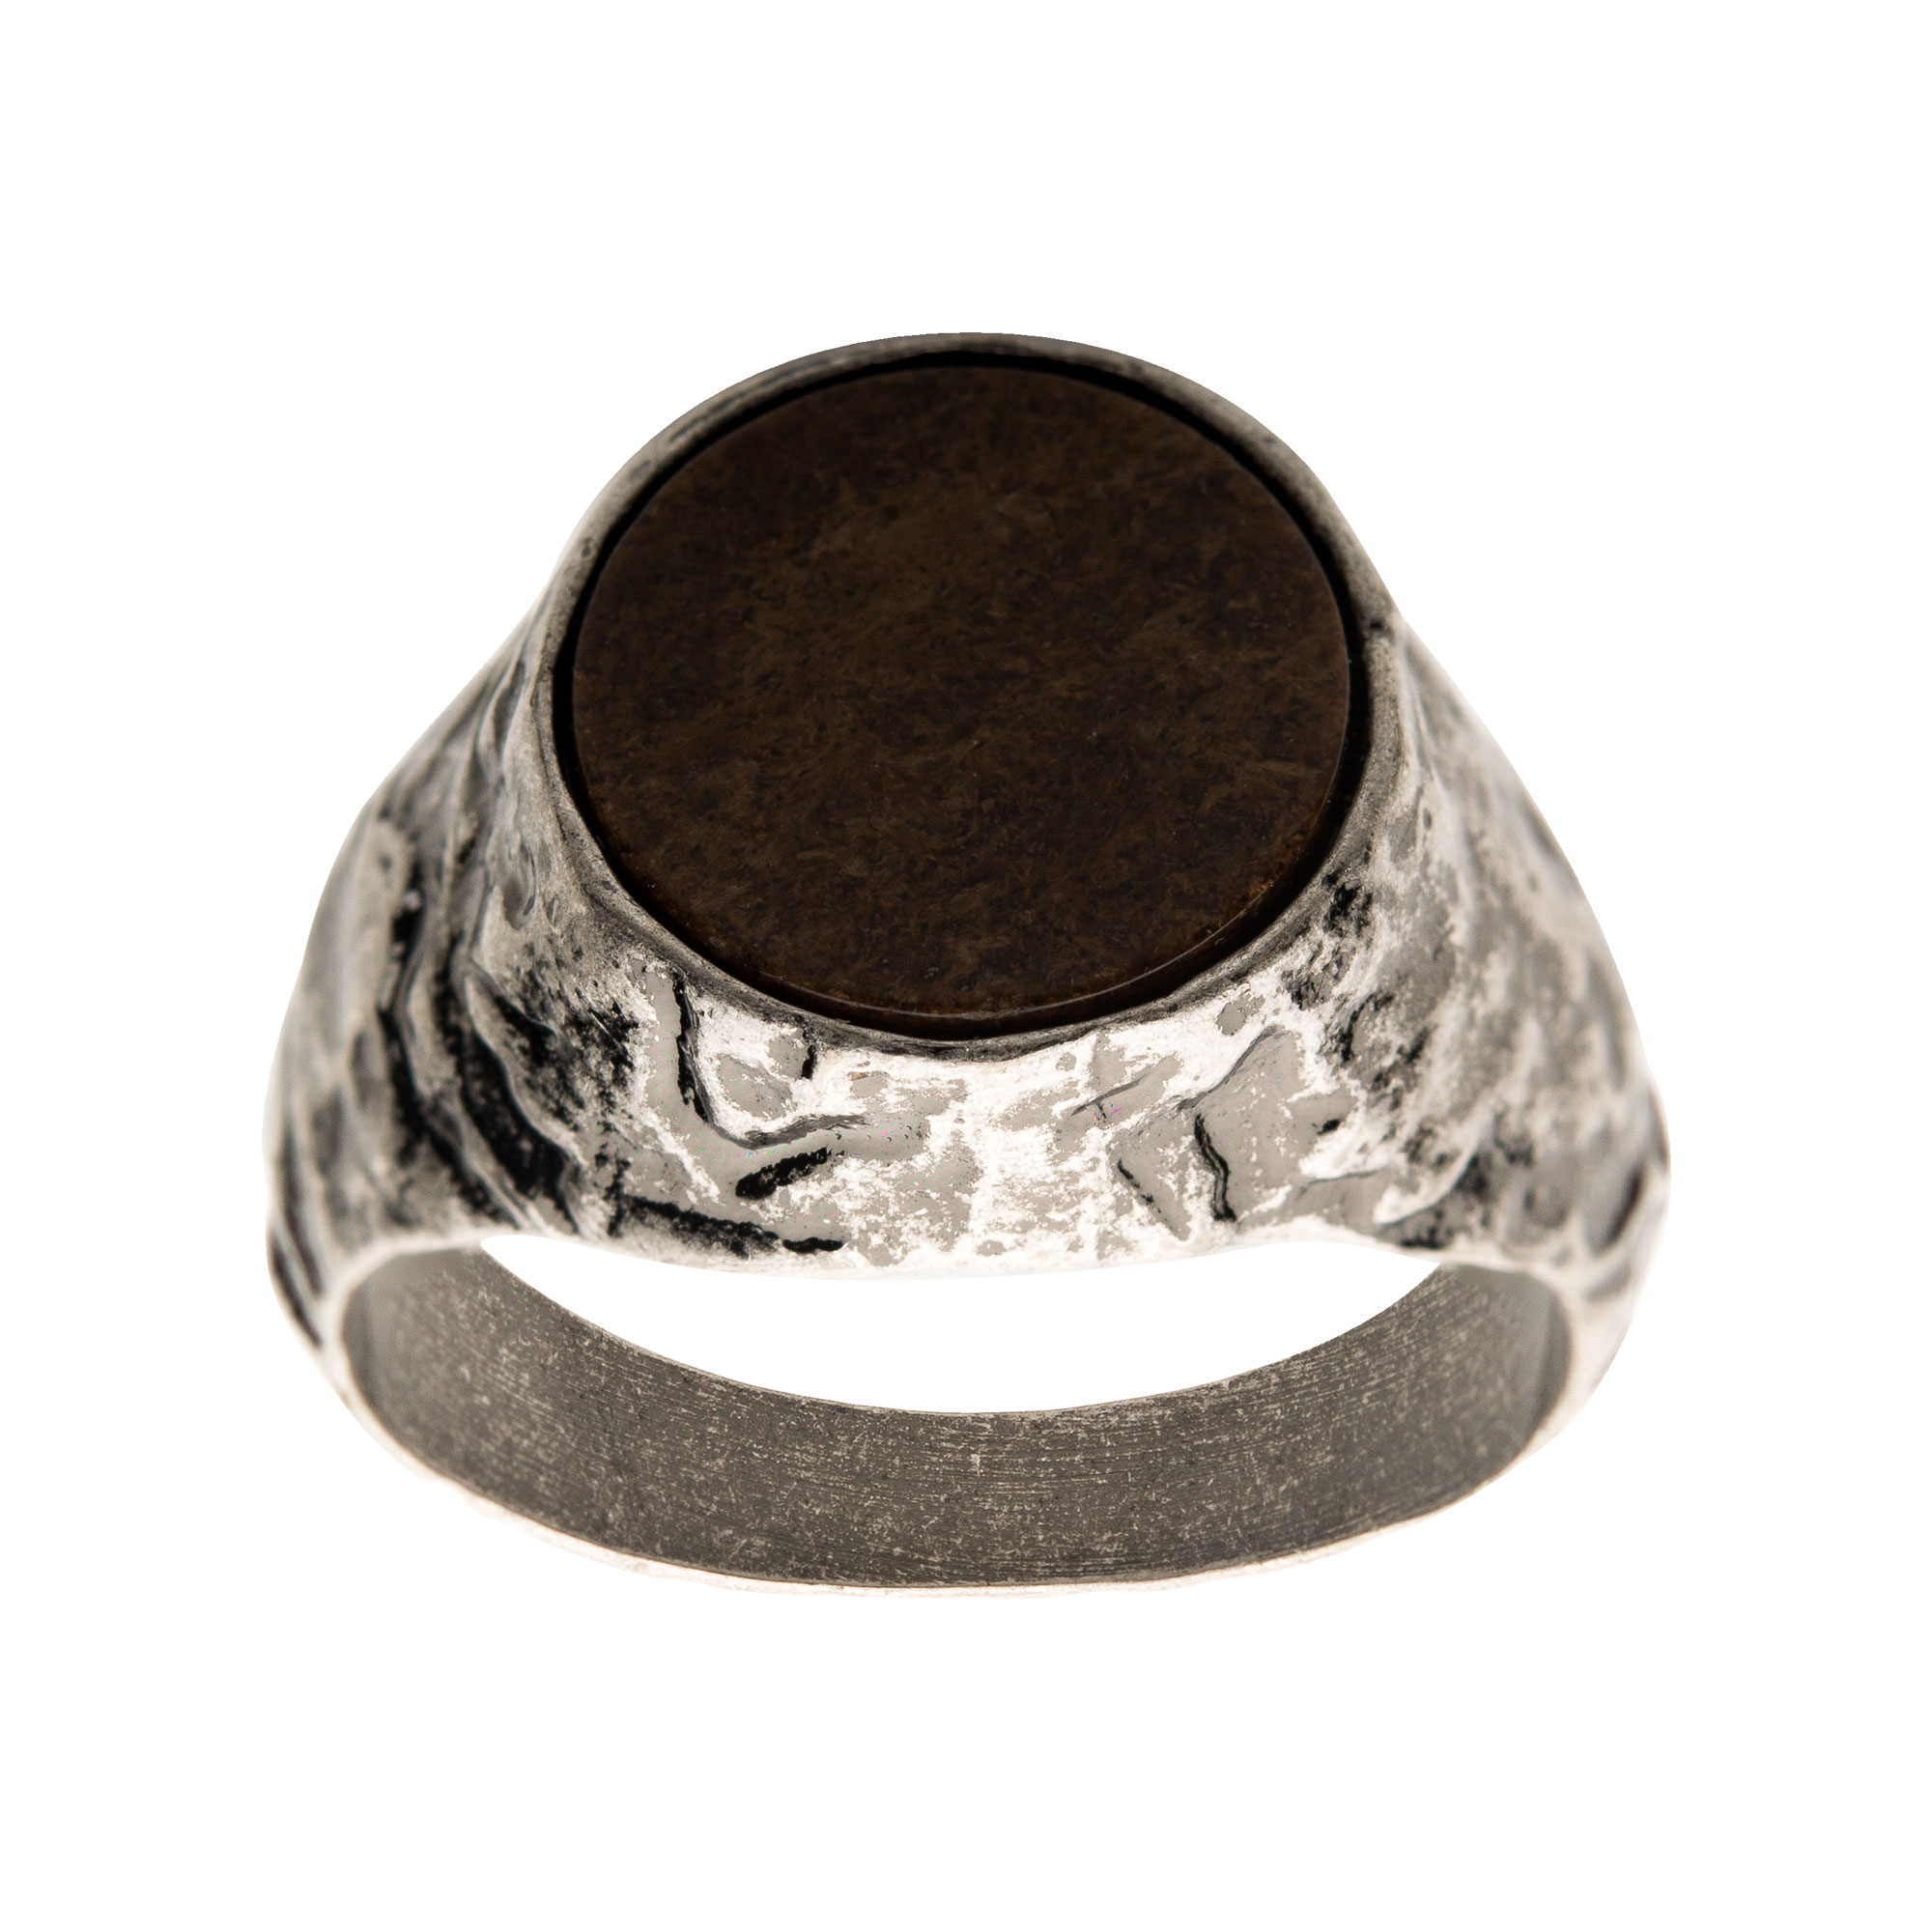 Stainless Steel Silver Plated with Bronze Stone Ring Image 2 Selman's Jewelers-Gemologist McComb, MS